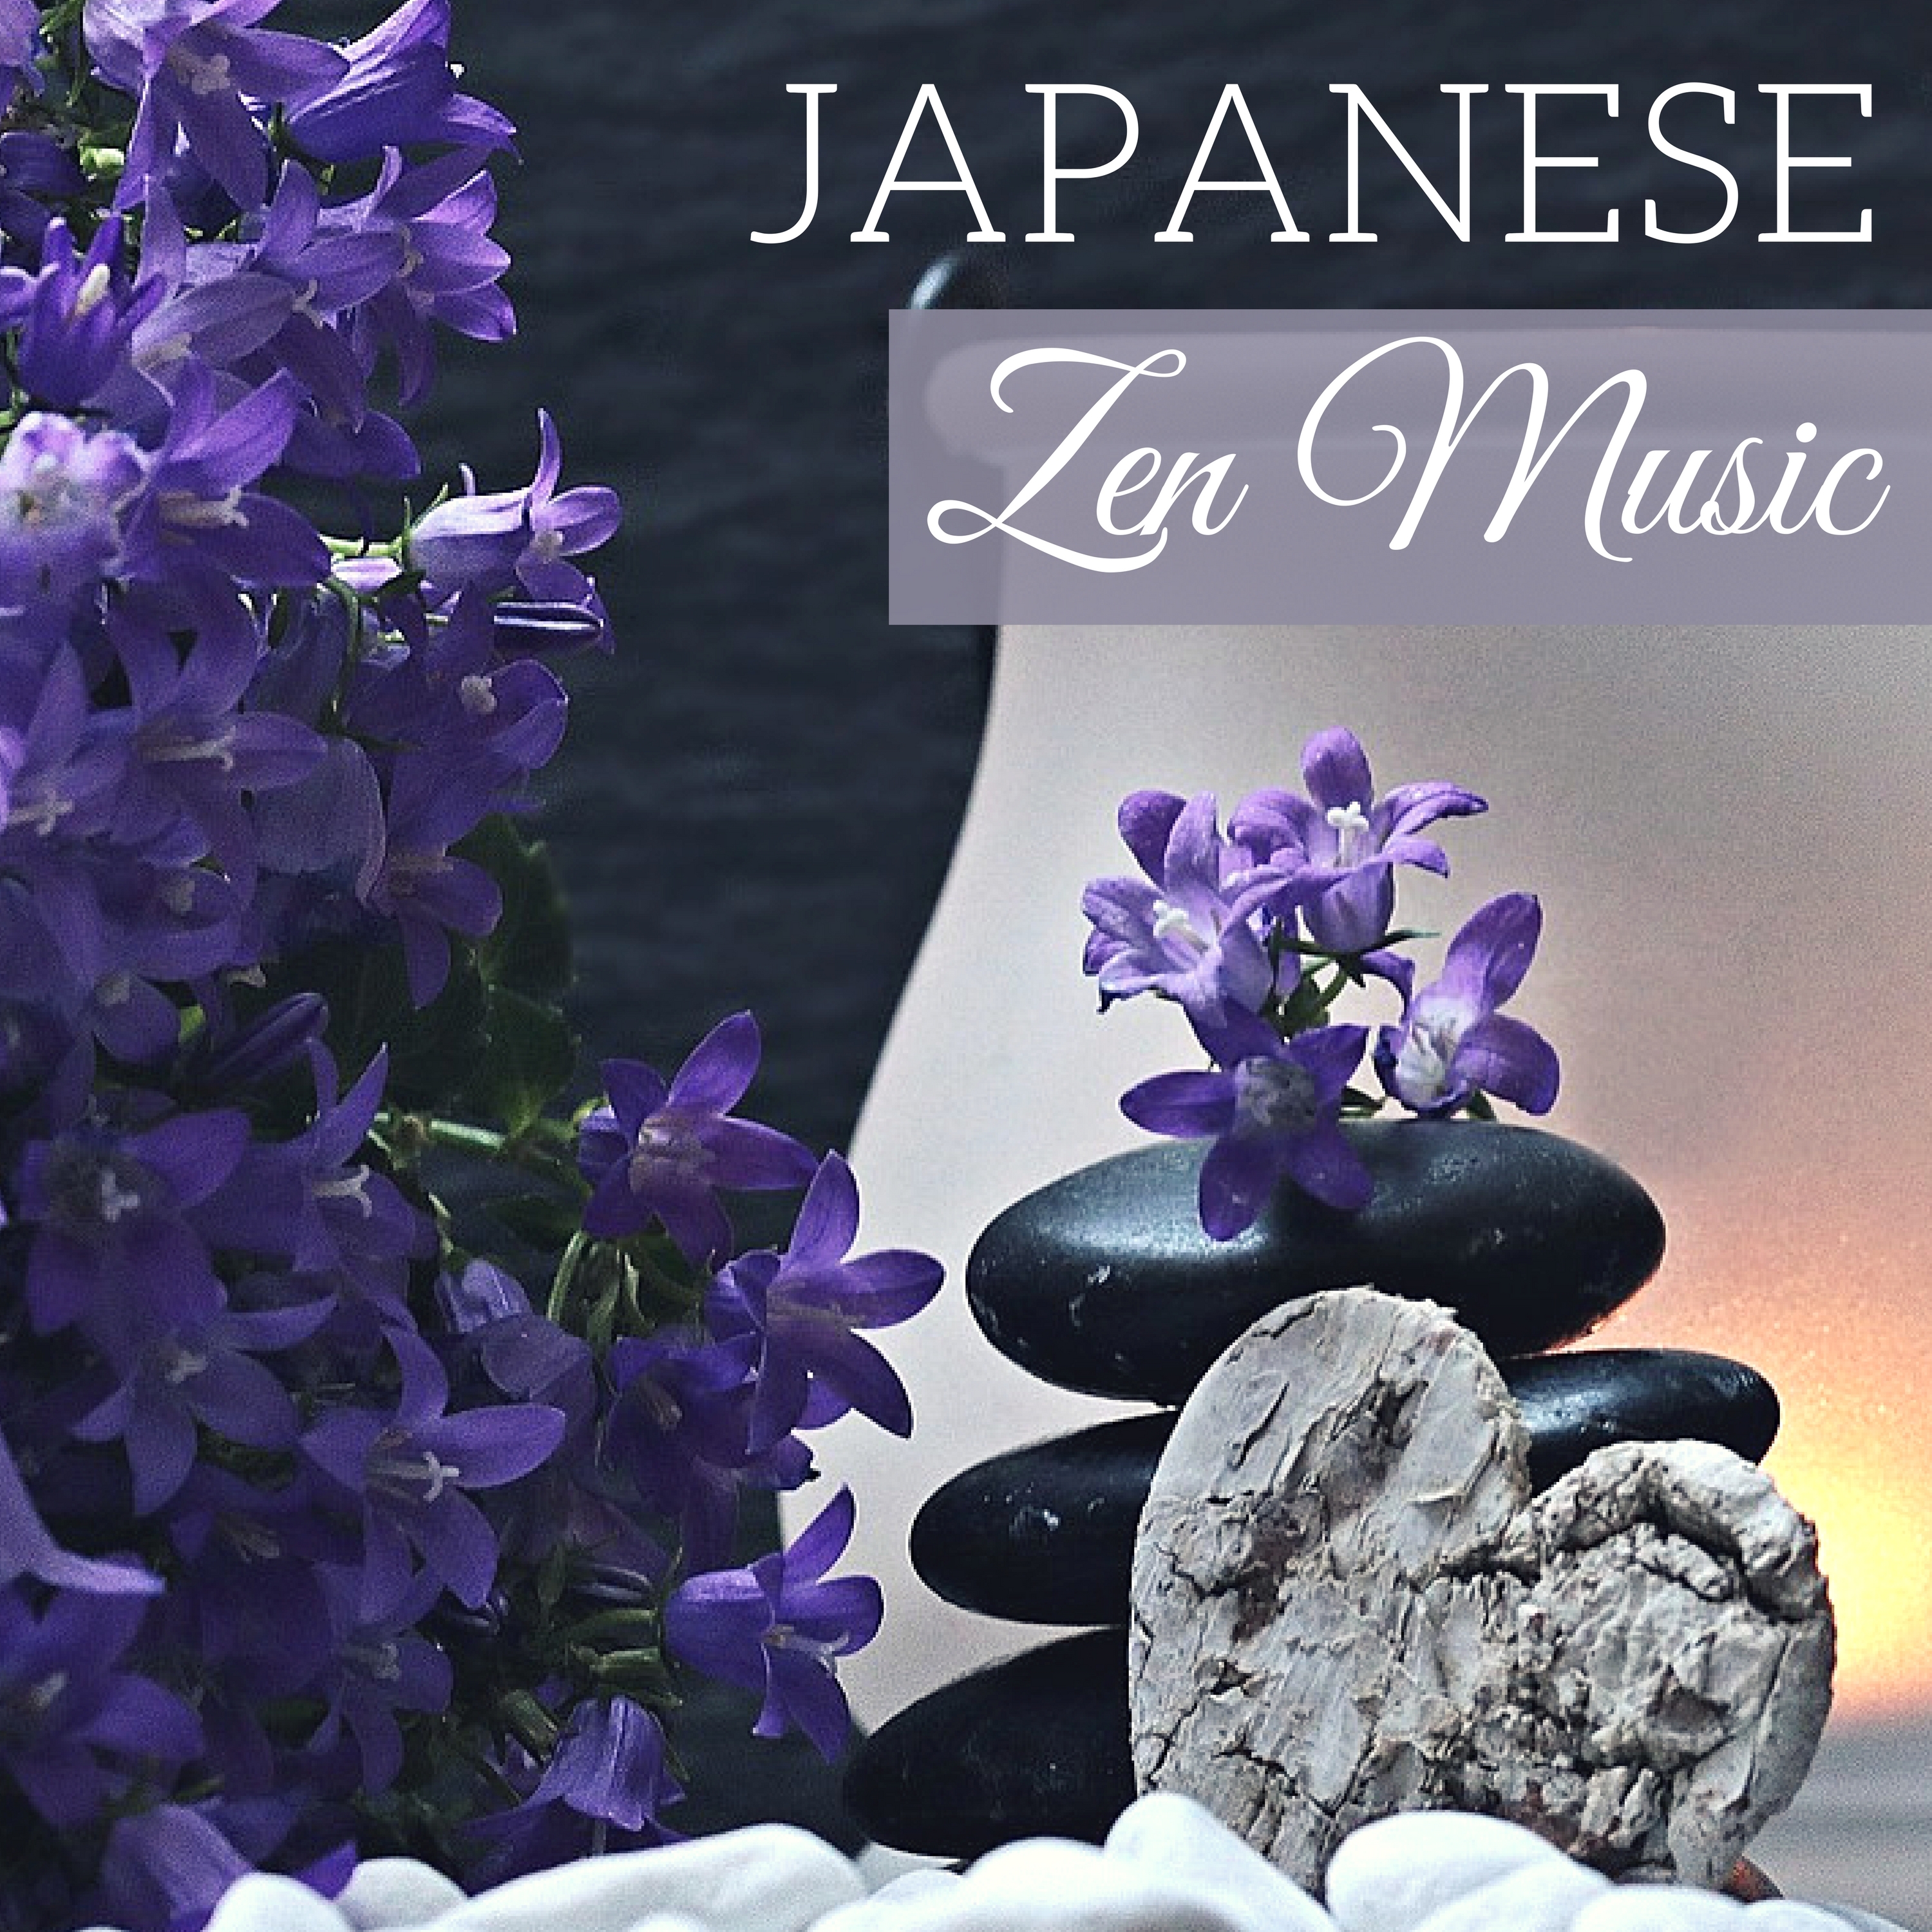 Japanese Zen Music: 20 Songs for Quiet Peaceful Spa Moments at Home & Hotel